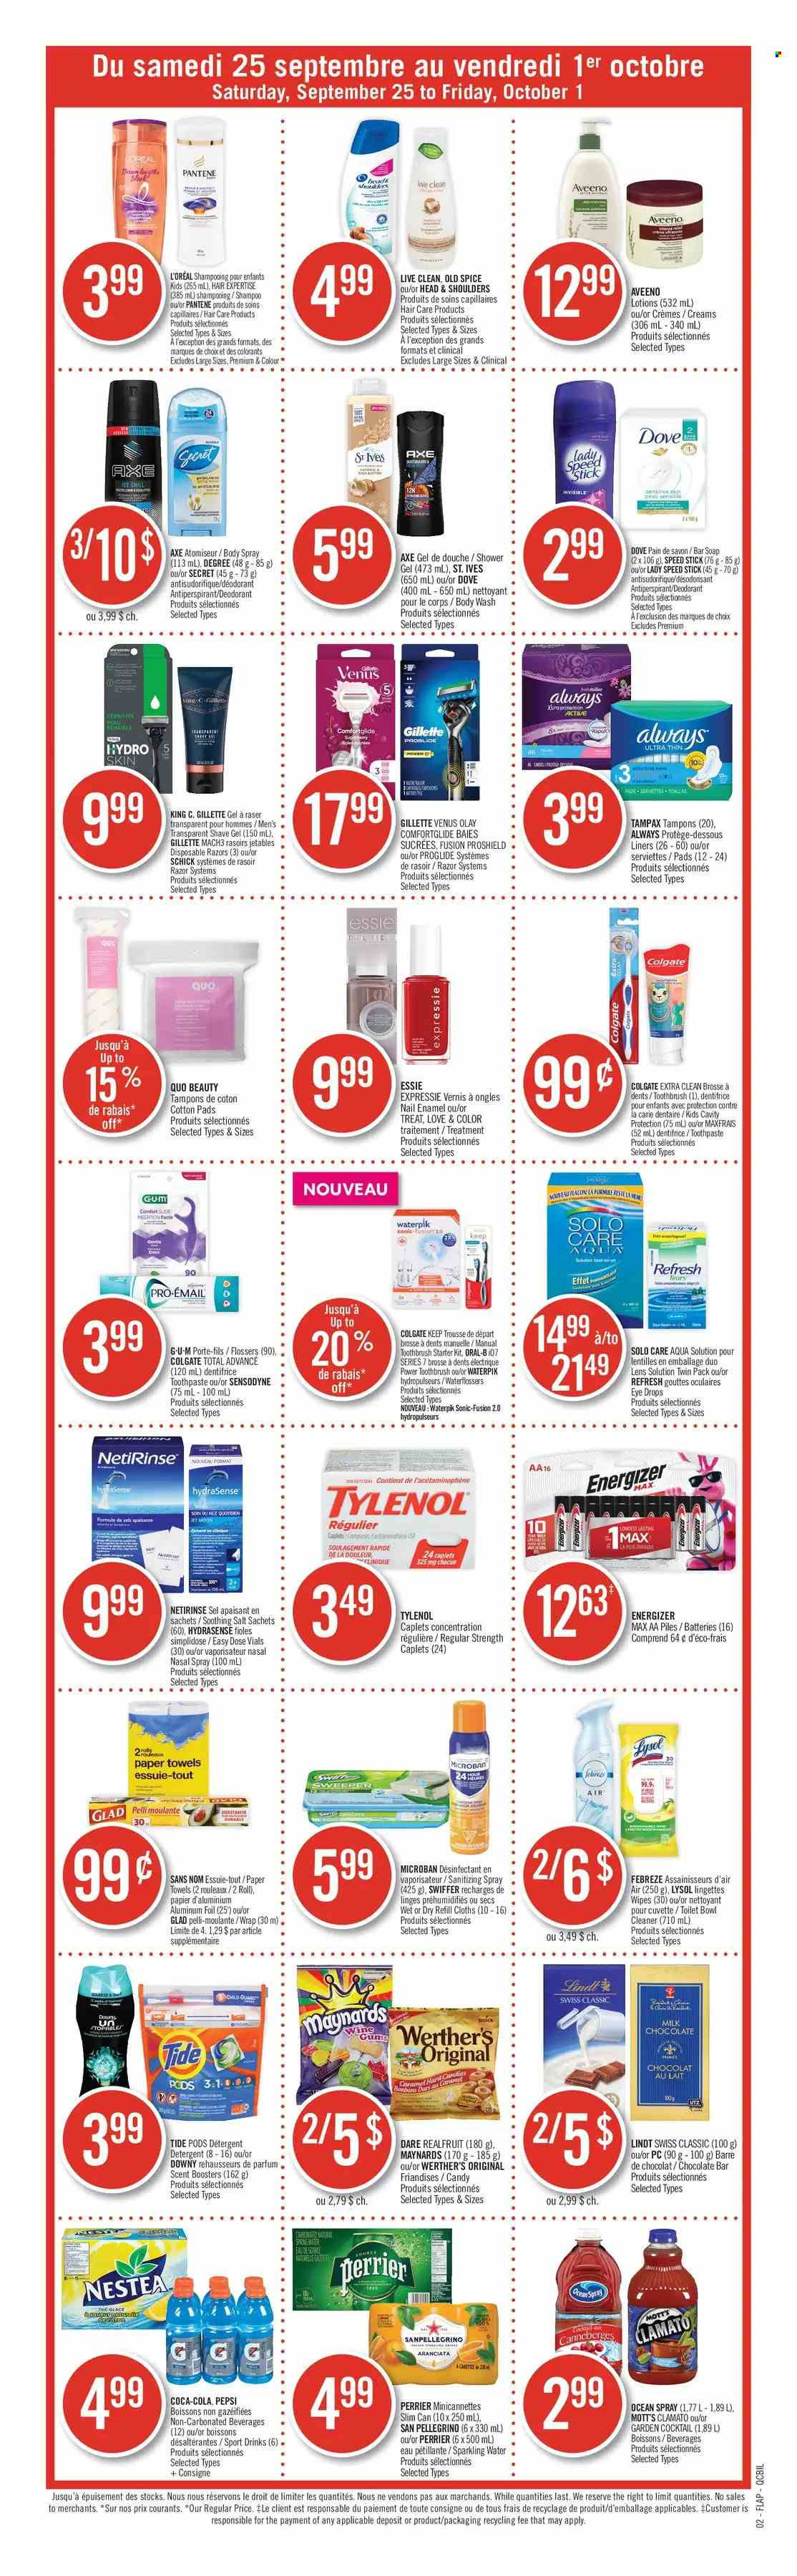 thumbnail - Pharmaprix Flyer - September 25, 2021 - October 01, 2021 - Sales products - Mott's, milk chocolate, chocolate bar, salt, spice, caramel, Coca-Cola, Pepsi, Clamato, Perrier, sparkling water, San Pellegrino, wipes, Aveeno, kitchen towels, paper towels, Febreze, cleaner, Lysol, Swiffer, Tide, scent booster, body wash, shower gel, soap bar, soap, toothbrush, toothpaste, tampons, Clinique, L’Oréal, Olay, body spray, anti-perspirant, Speed Stick, razor, shave gel, Schick, Venus, disposable razor, nail enamel, aluminium foil, deco strips, battery, lens, Tylenol, eye drops, nasal spray, detergent, Dove, Energizer, Colgate, Gillette, shampoo, Tampax, Head & Shoulders, Pantene, Old Spice, Oral-B, Sensodyne, Lindt, deodorant. Page 13.